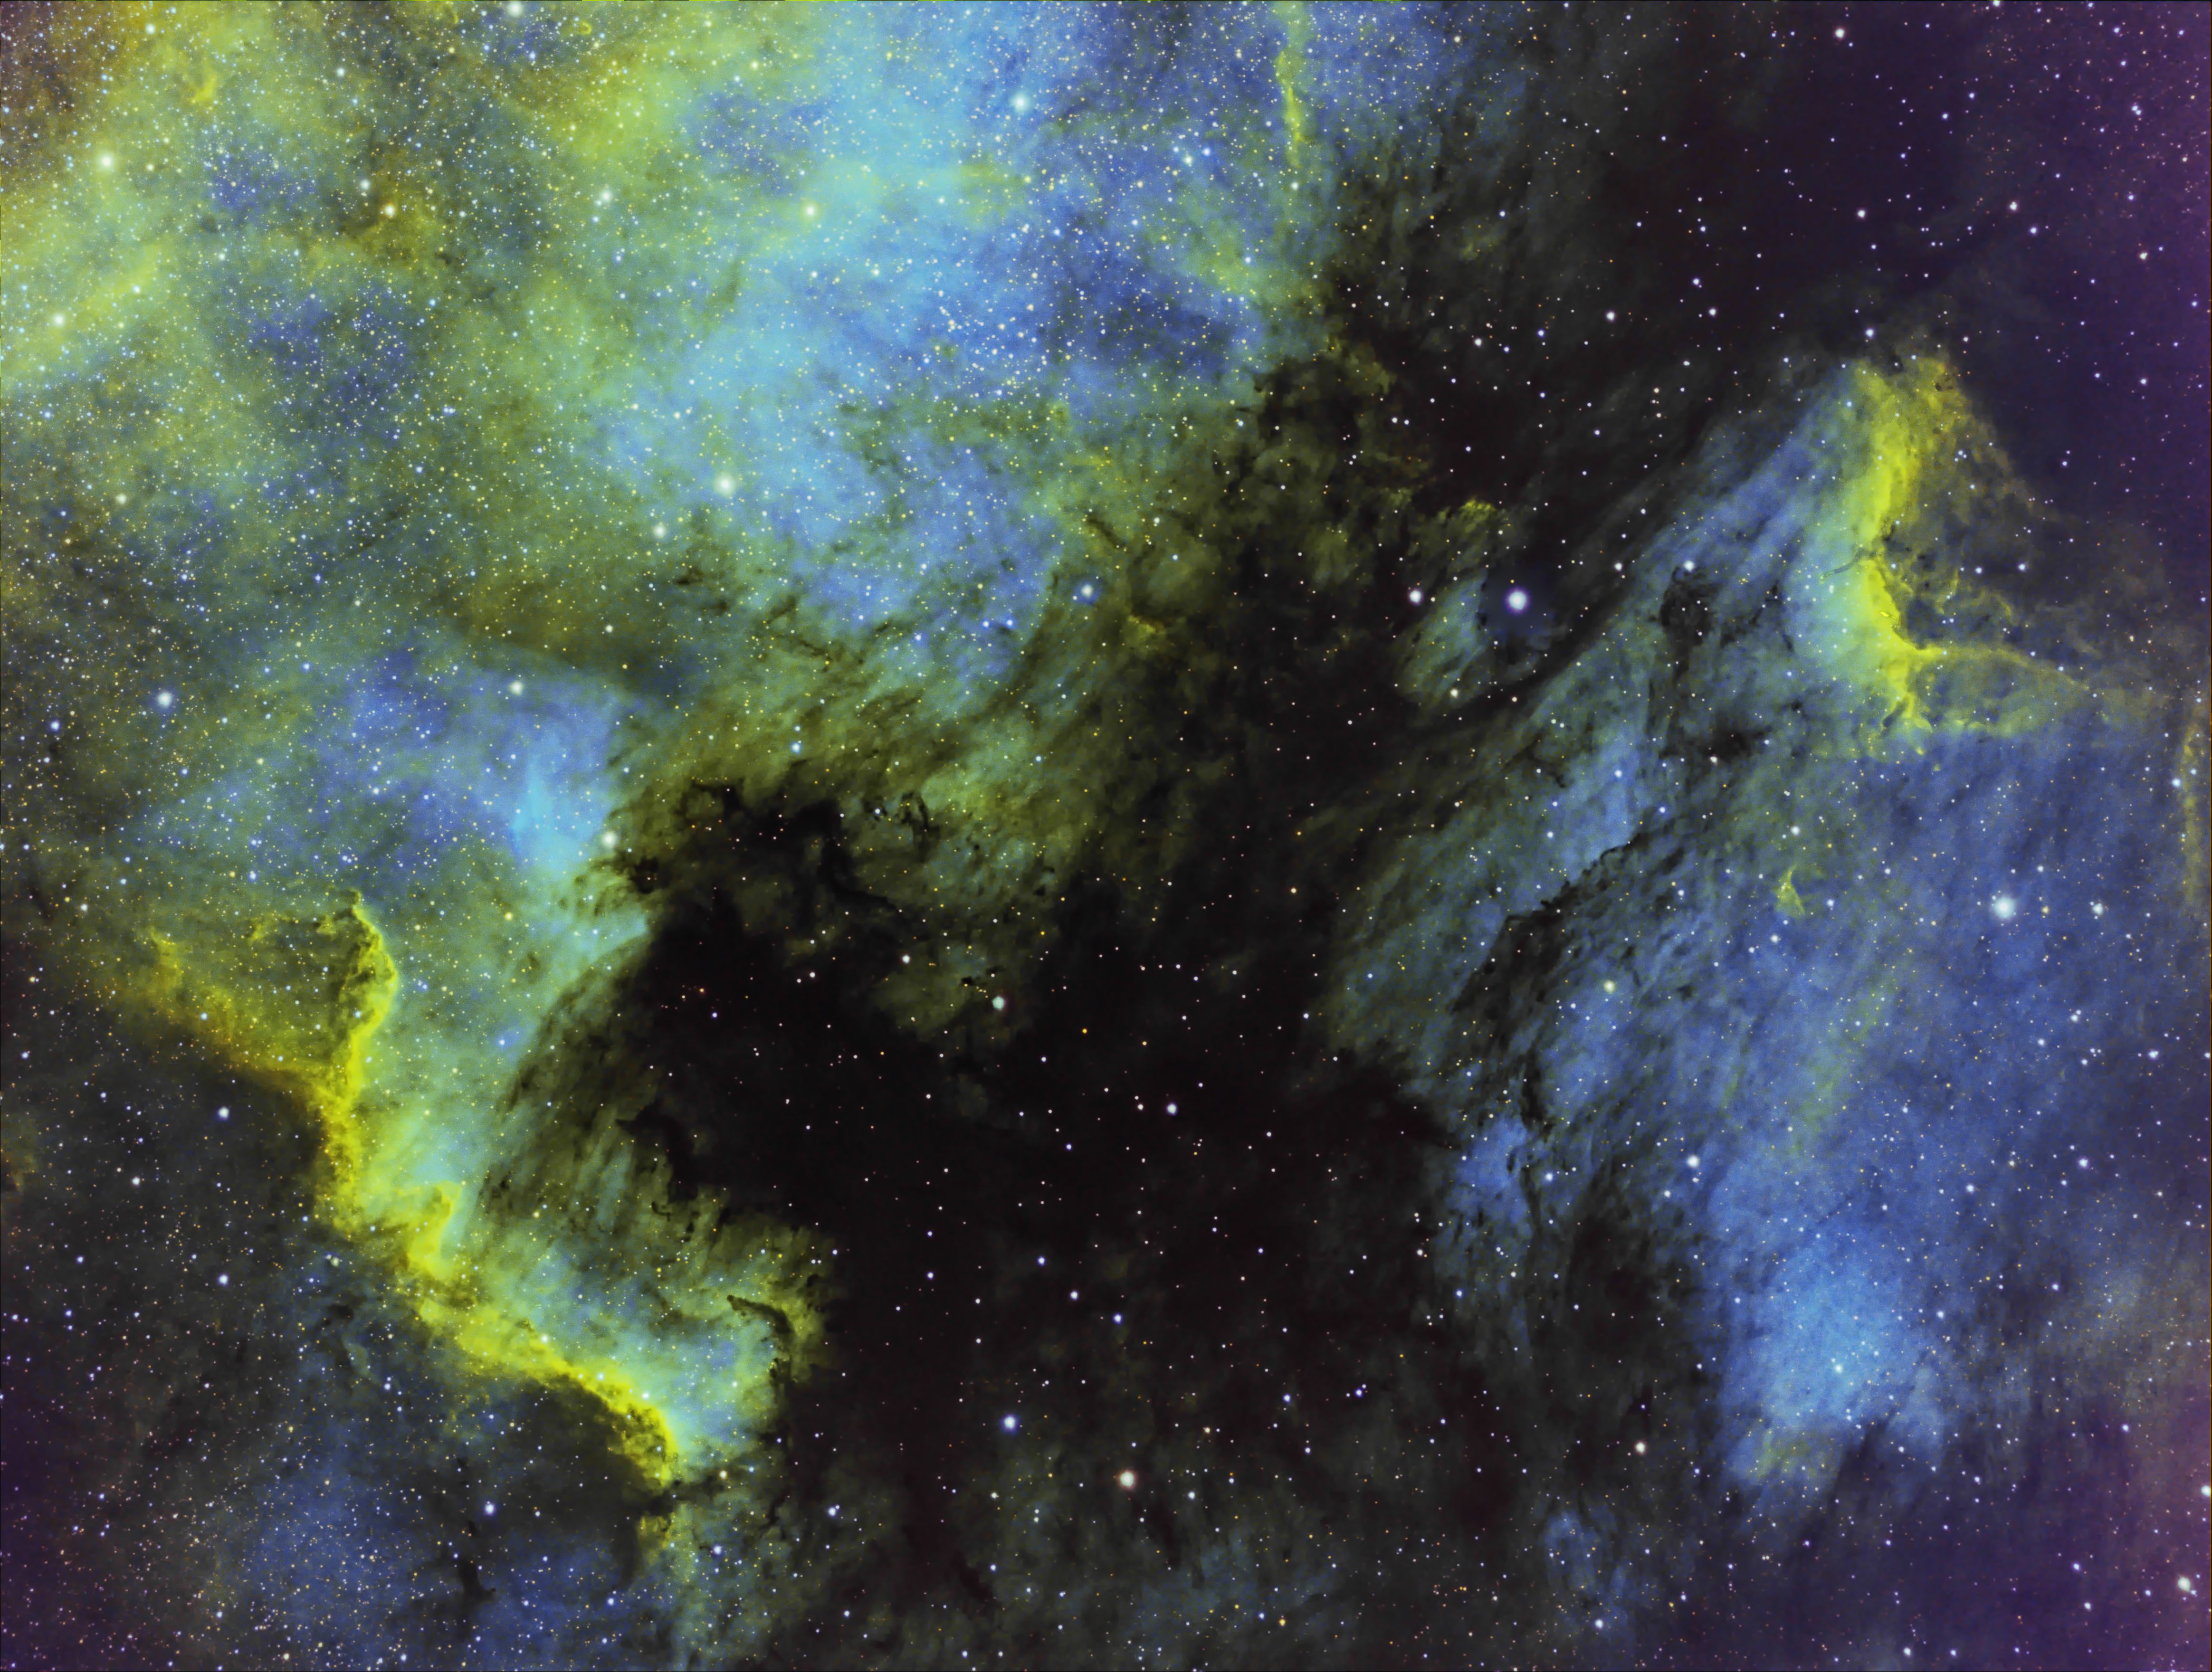 North American and Pelican Nebulas in narrowband HSO, Hubble Pallette.